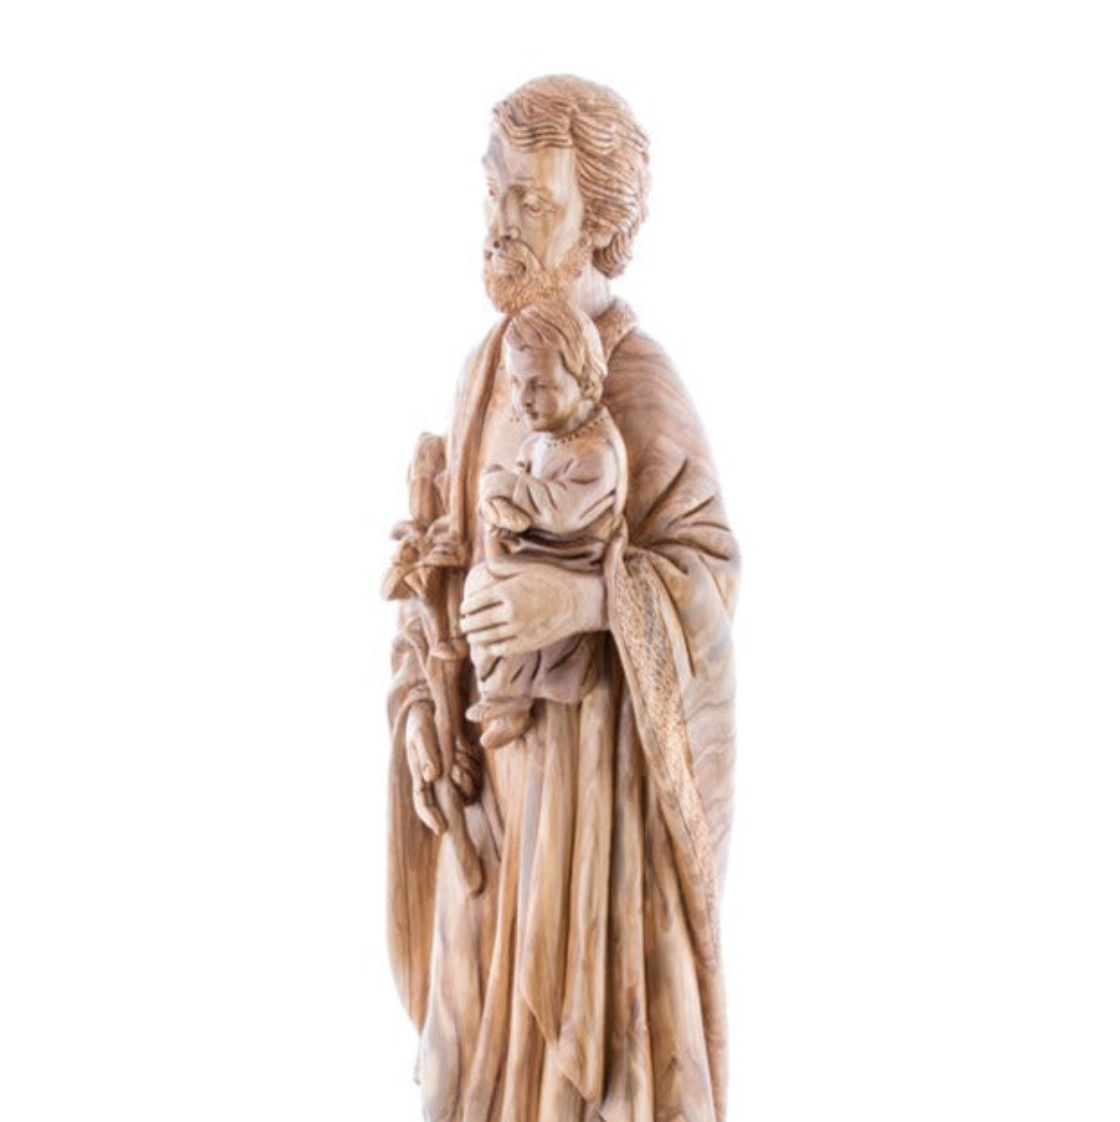 Saint Joesph Holding the Holy Child Jesus Christ and Lily Flower Carved Statue Realistic Sculpture Art  